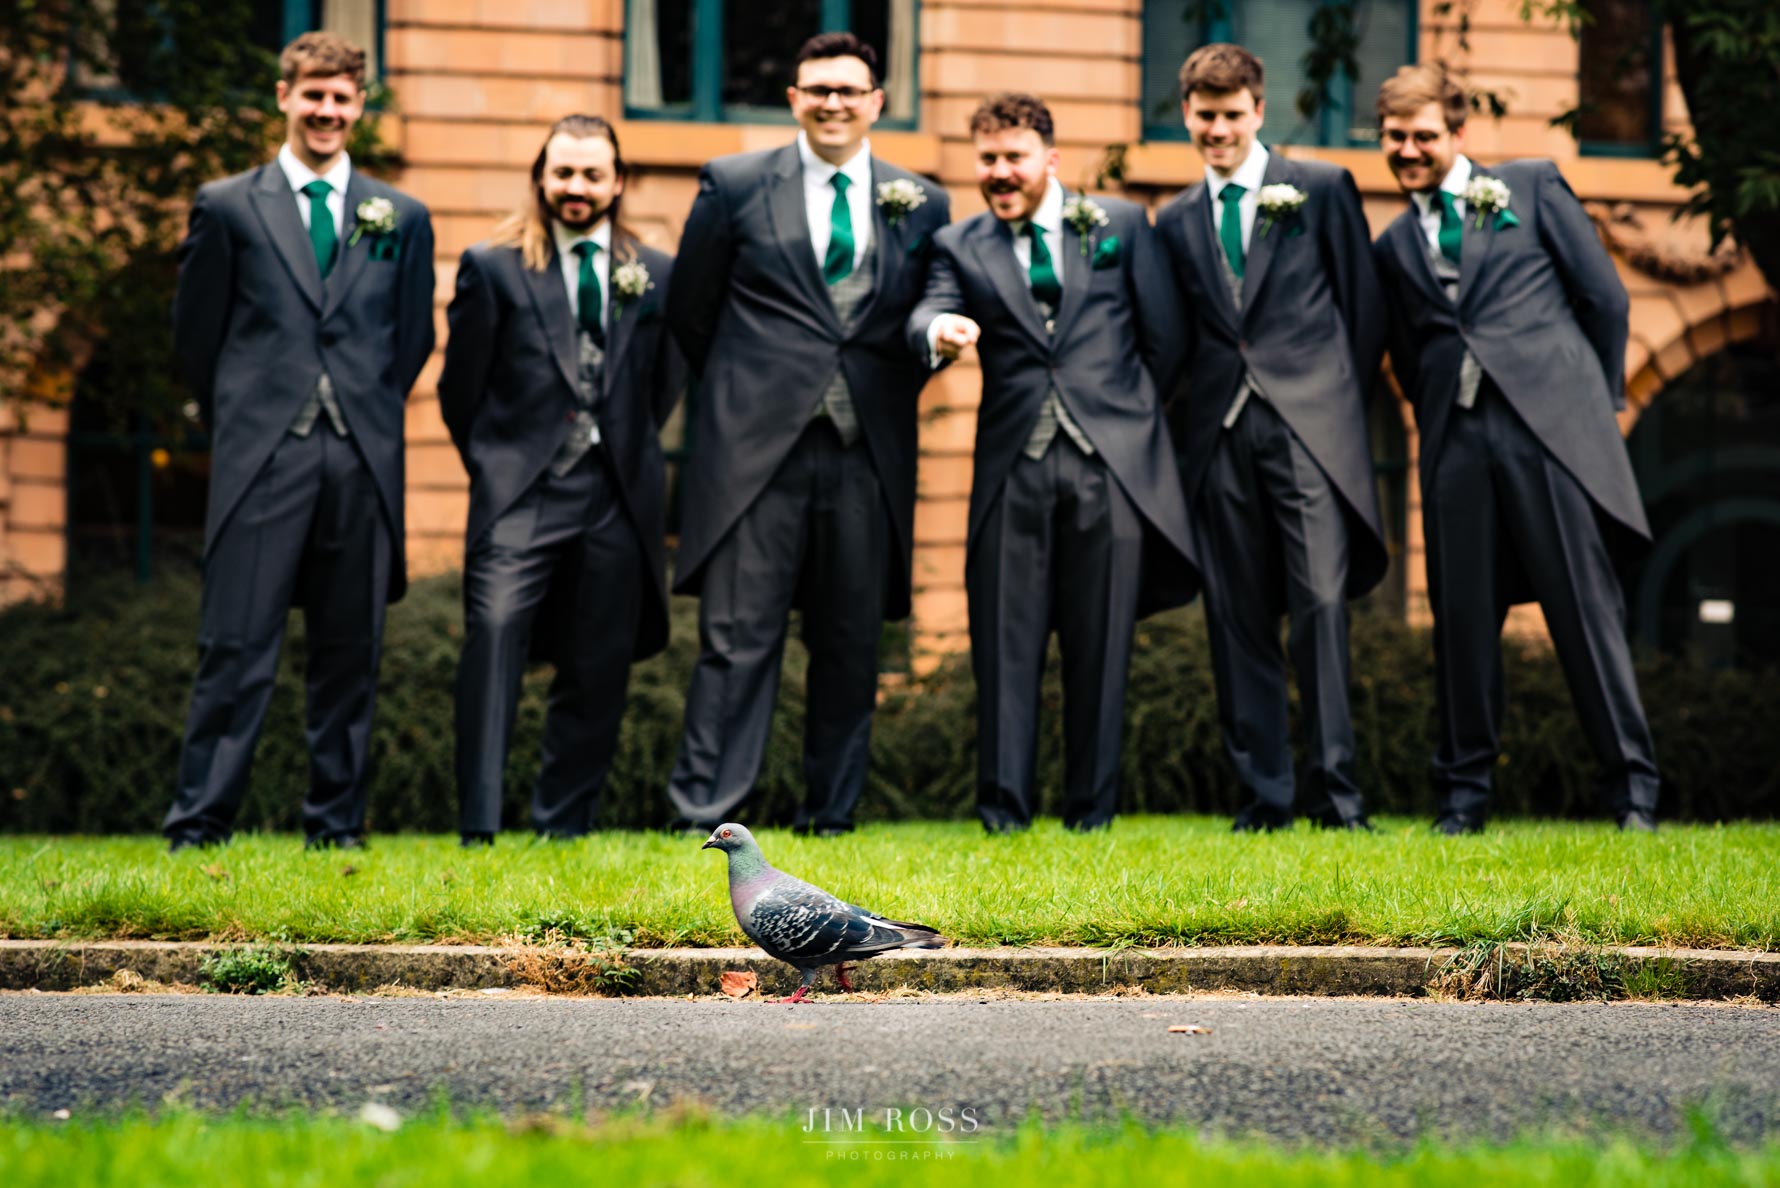 passing pigeon matches groom outfits